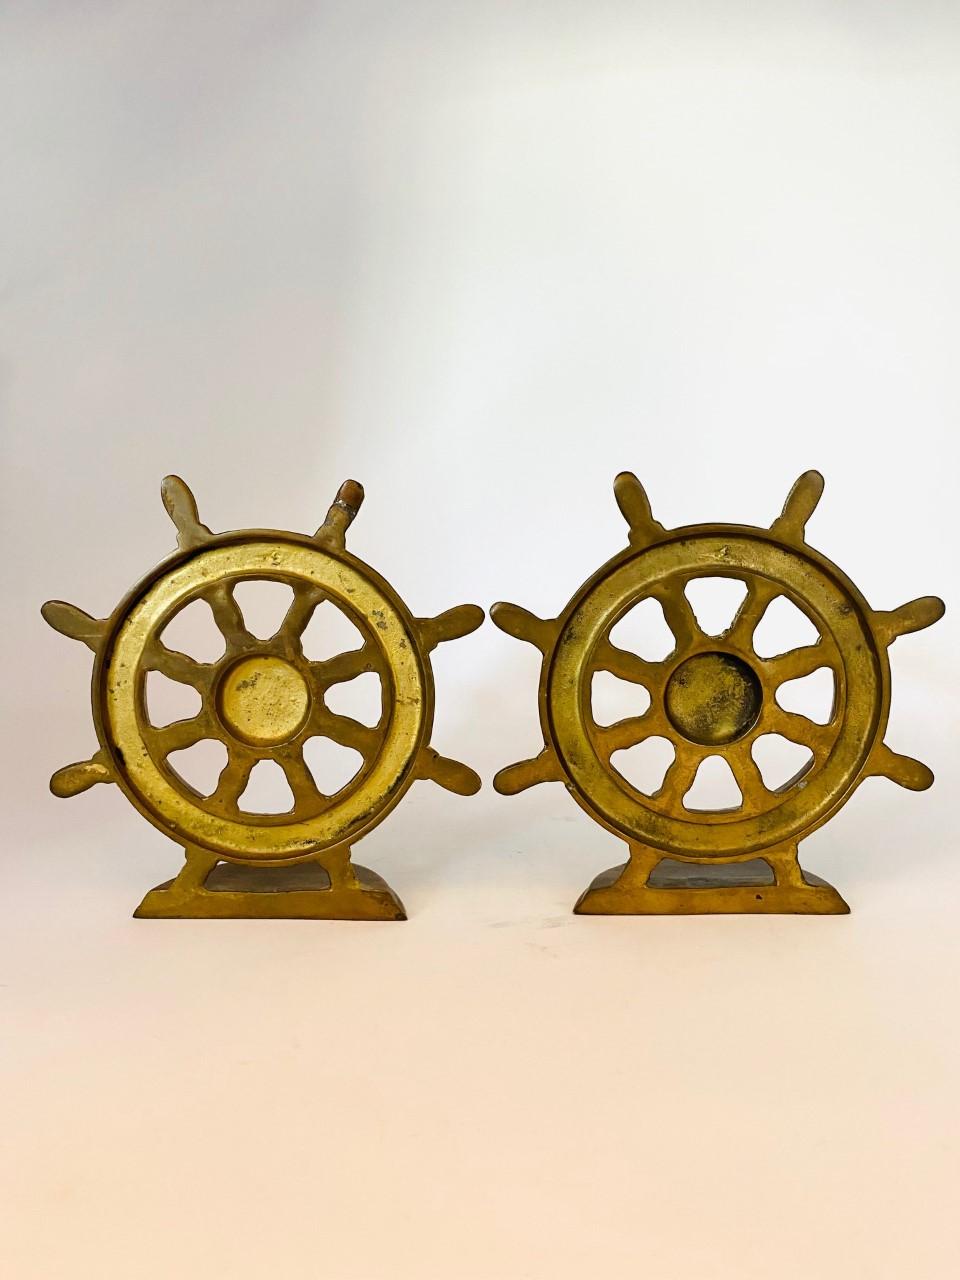 Vintage Brass Nautical Captain Ship Wheel Bookends In Good Condition For Sale In San Diego, CA